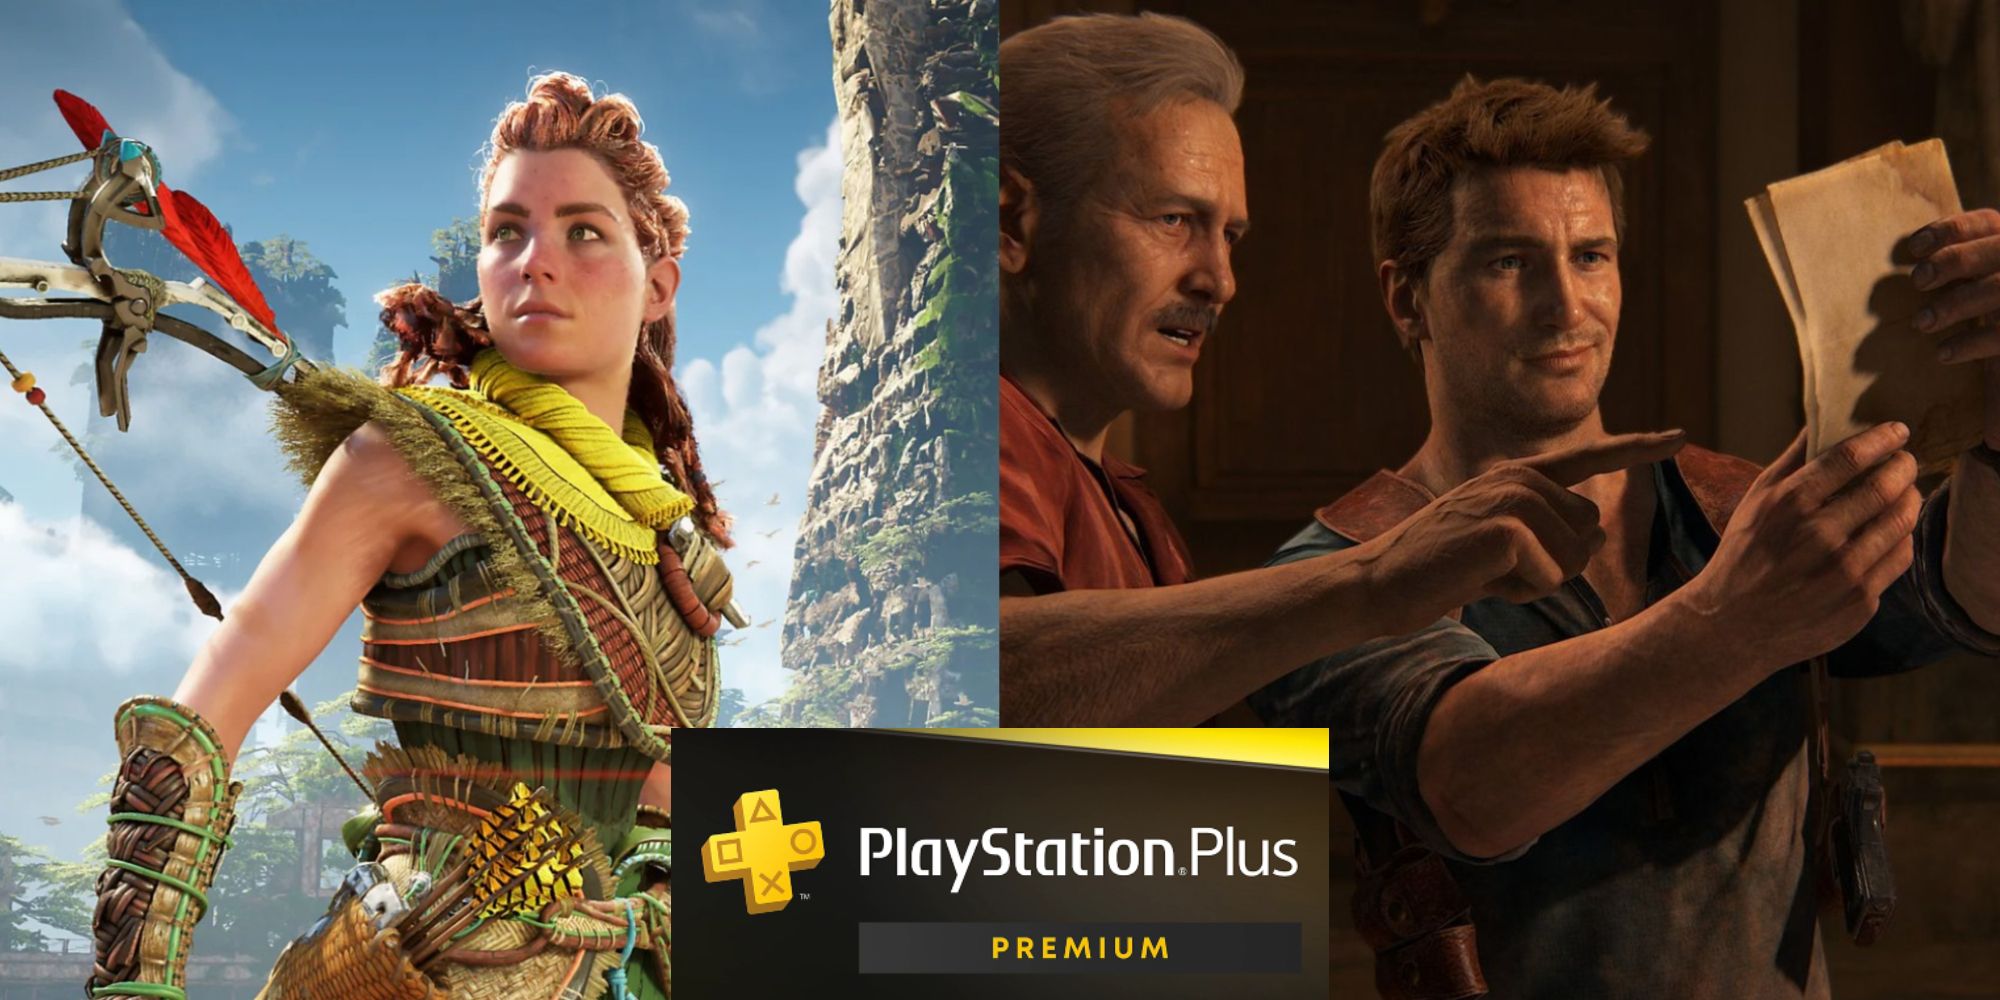 playstation plus featured image